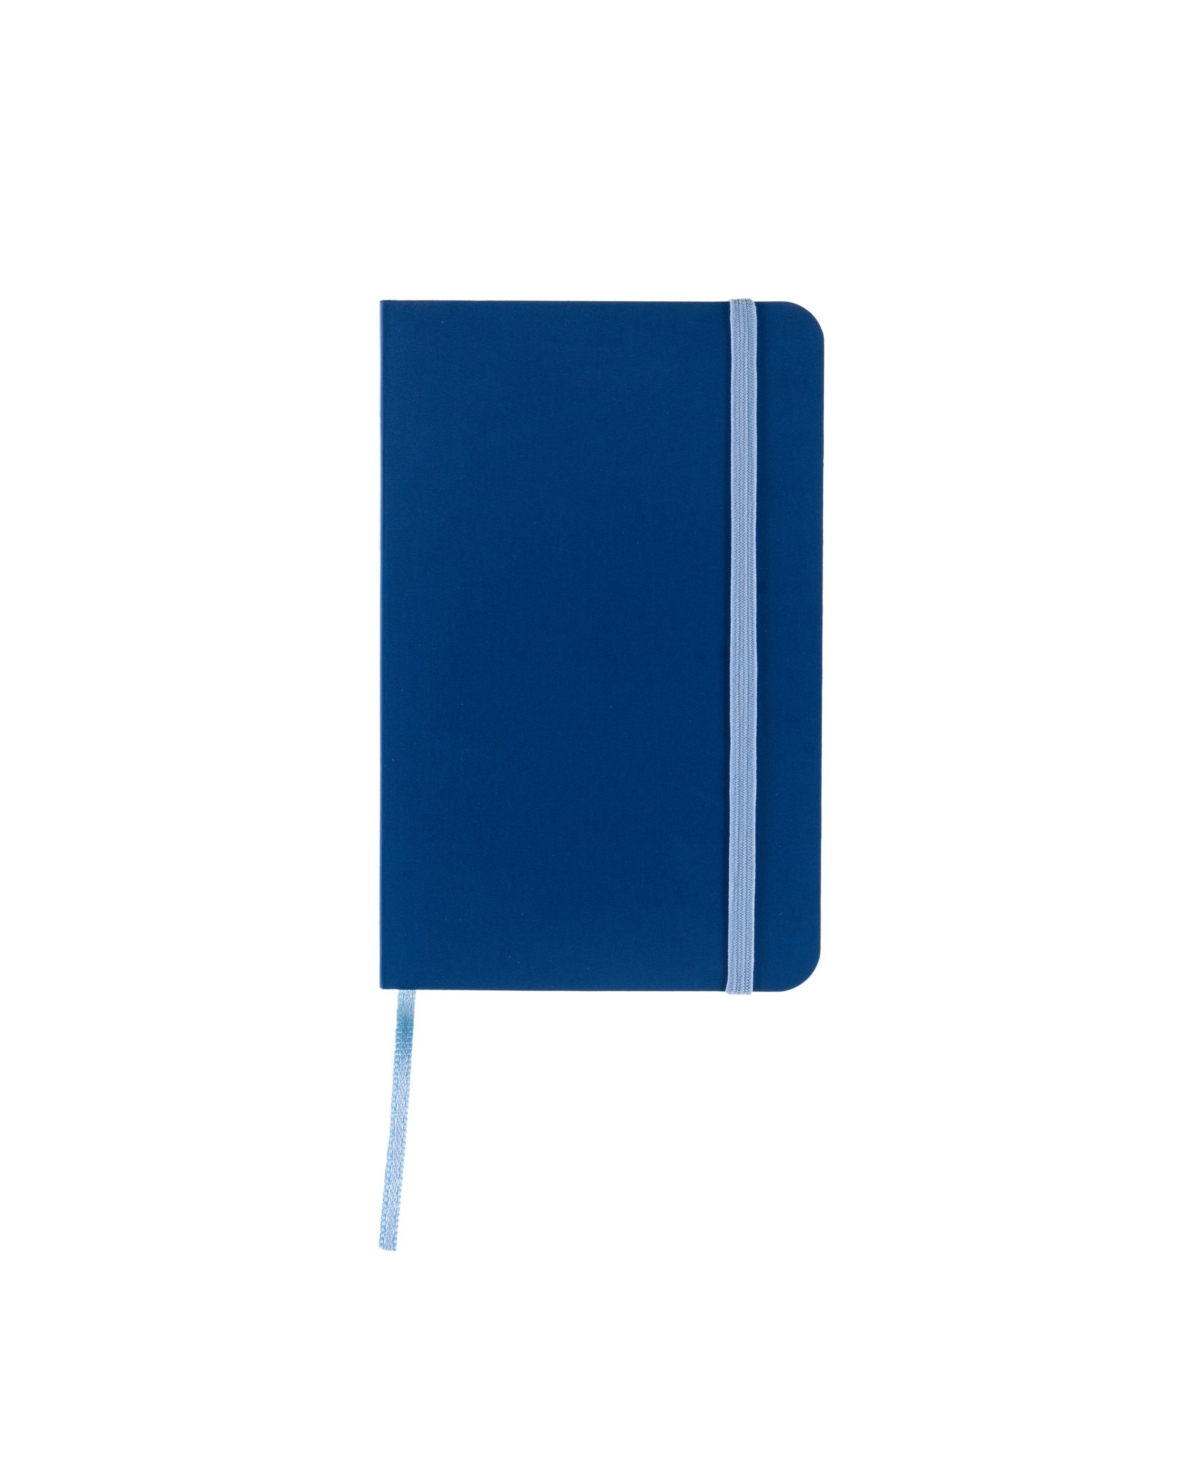 Ispira Soft Cover Lined Notebook, 3.5" x 5.5" - Blue